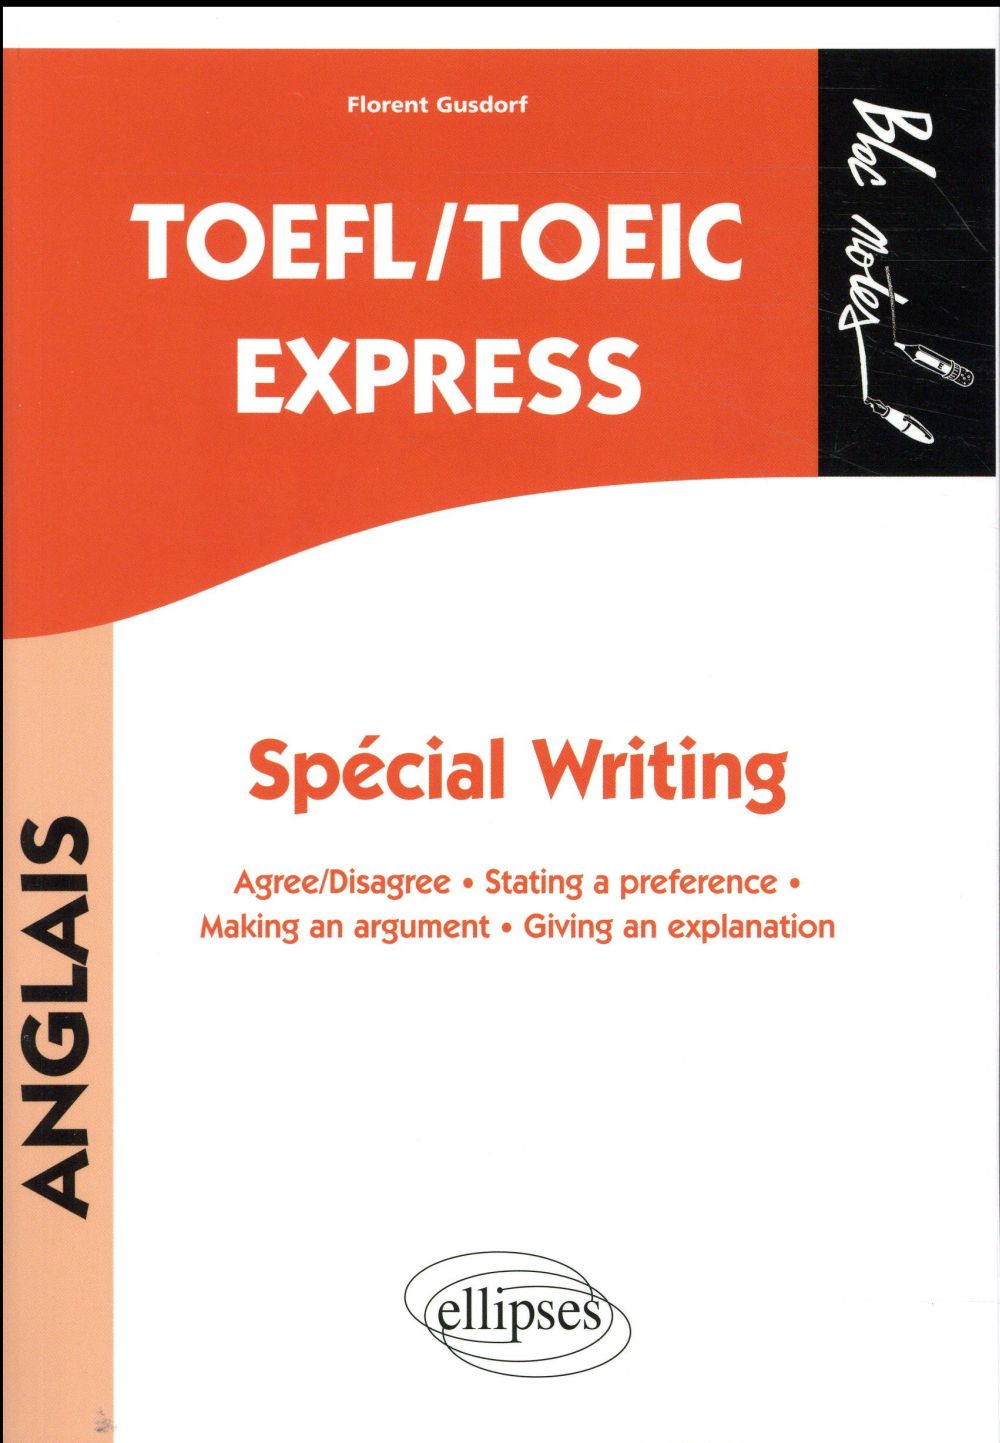 TOEFL/TOEIC EXPRESS. SPECIAL WRITING. AGREE/DISAGREE  -  STATING A PREFERENCE  -  MAKING AN ARGUMENT